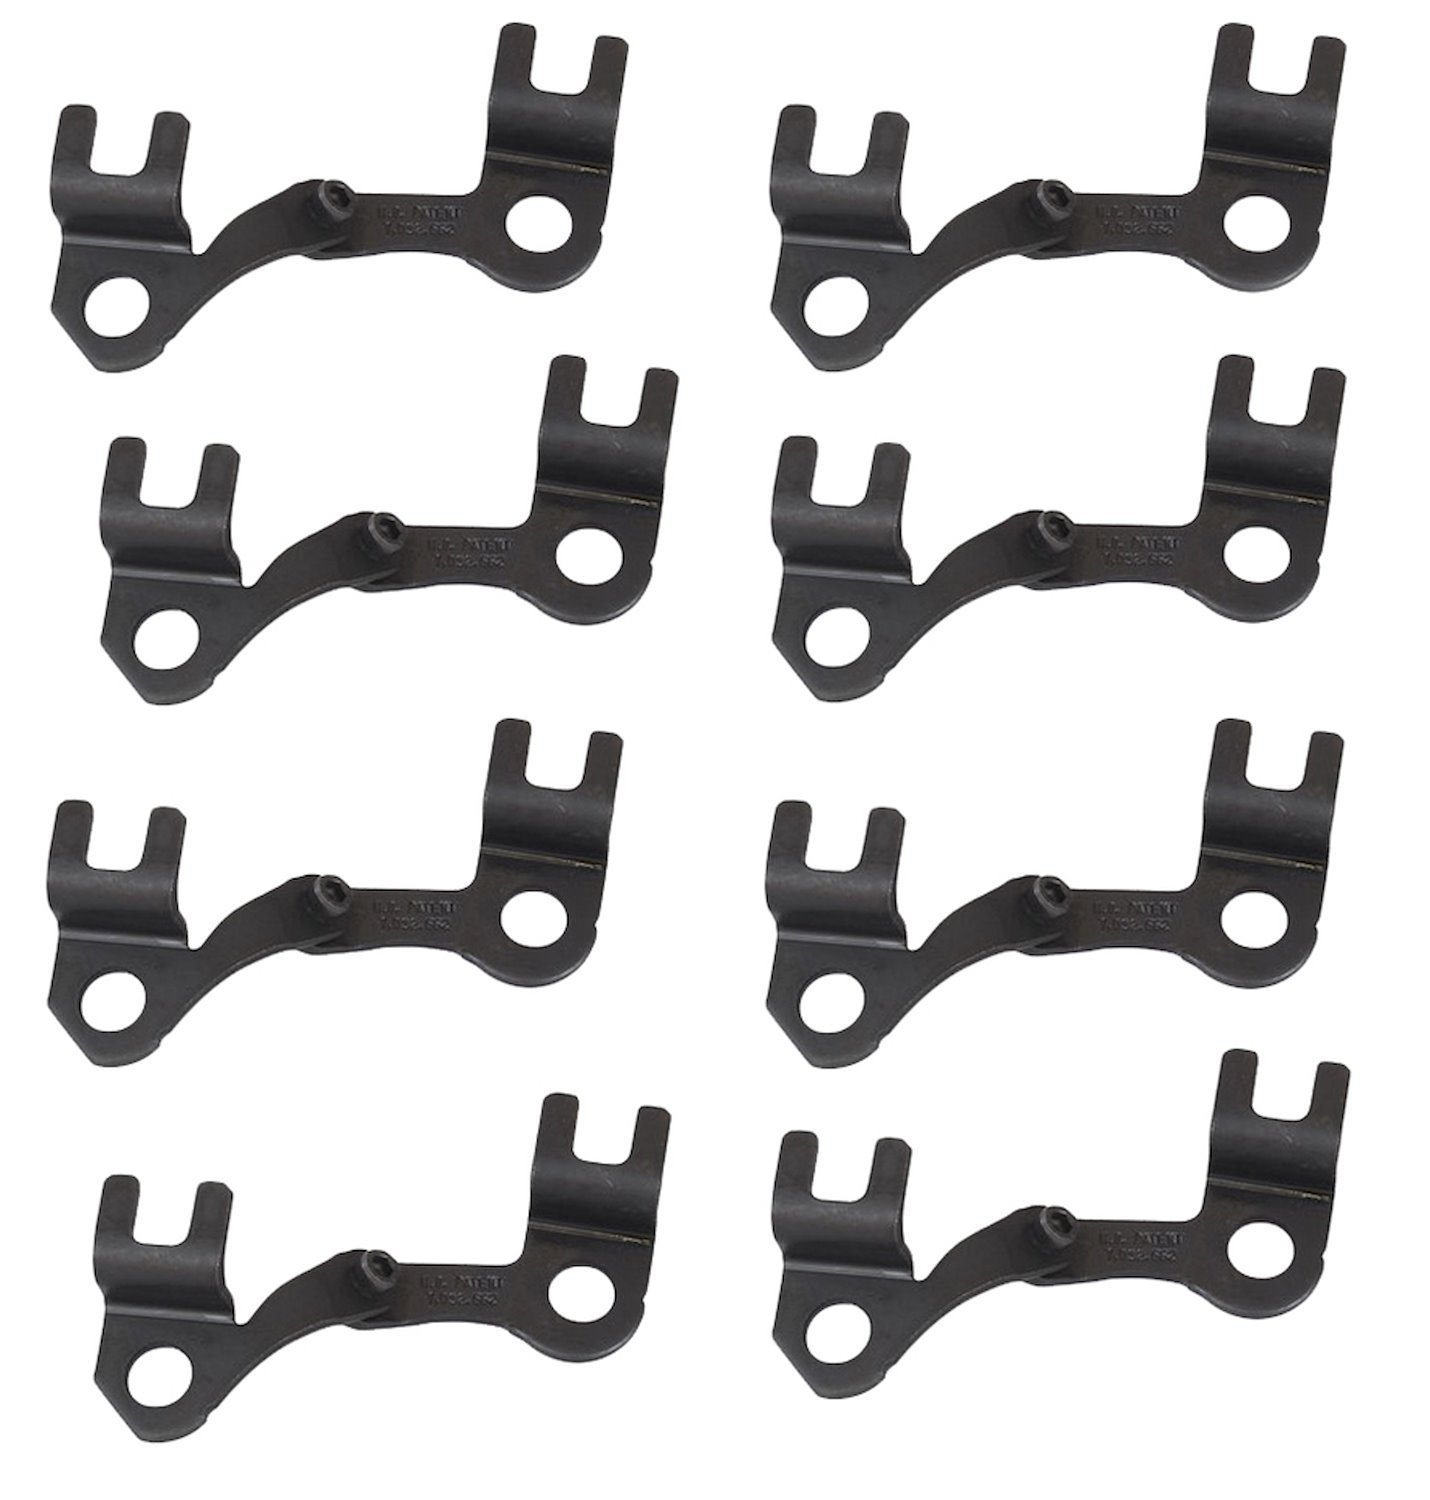 Adjustable Pushrod Guide Plates for Big Block Chevy Engines [3/8 in.]